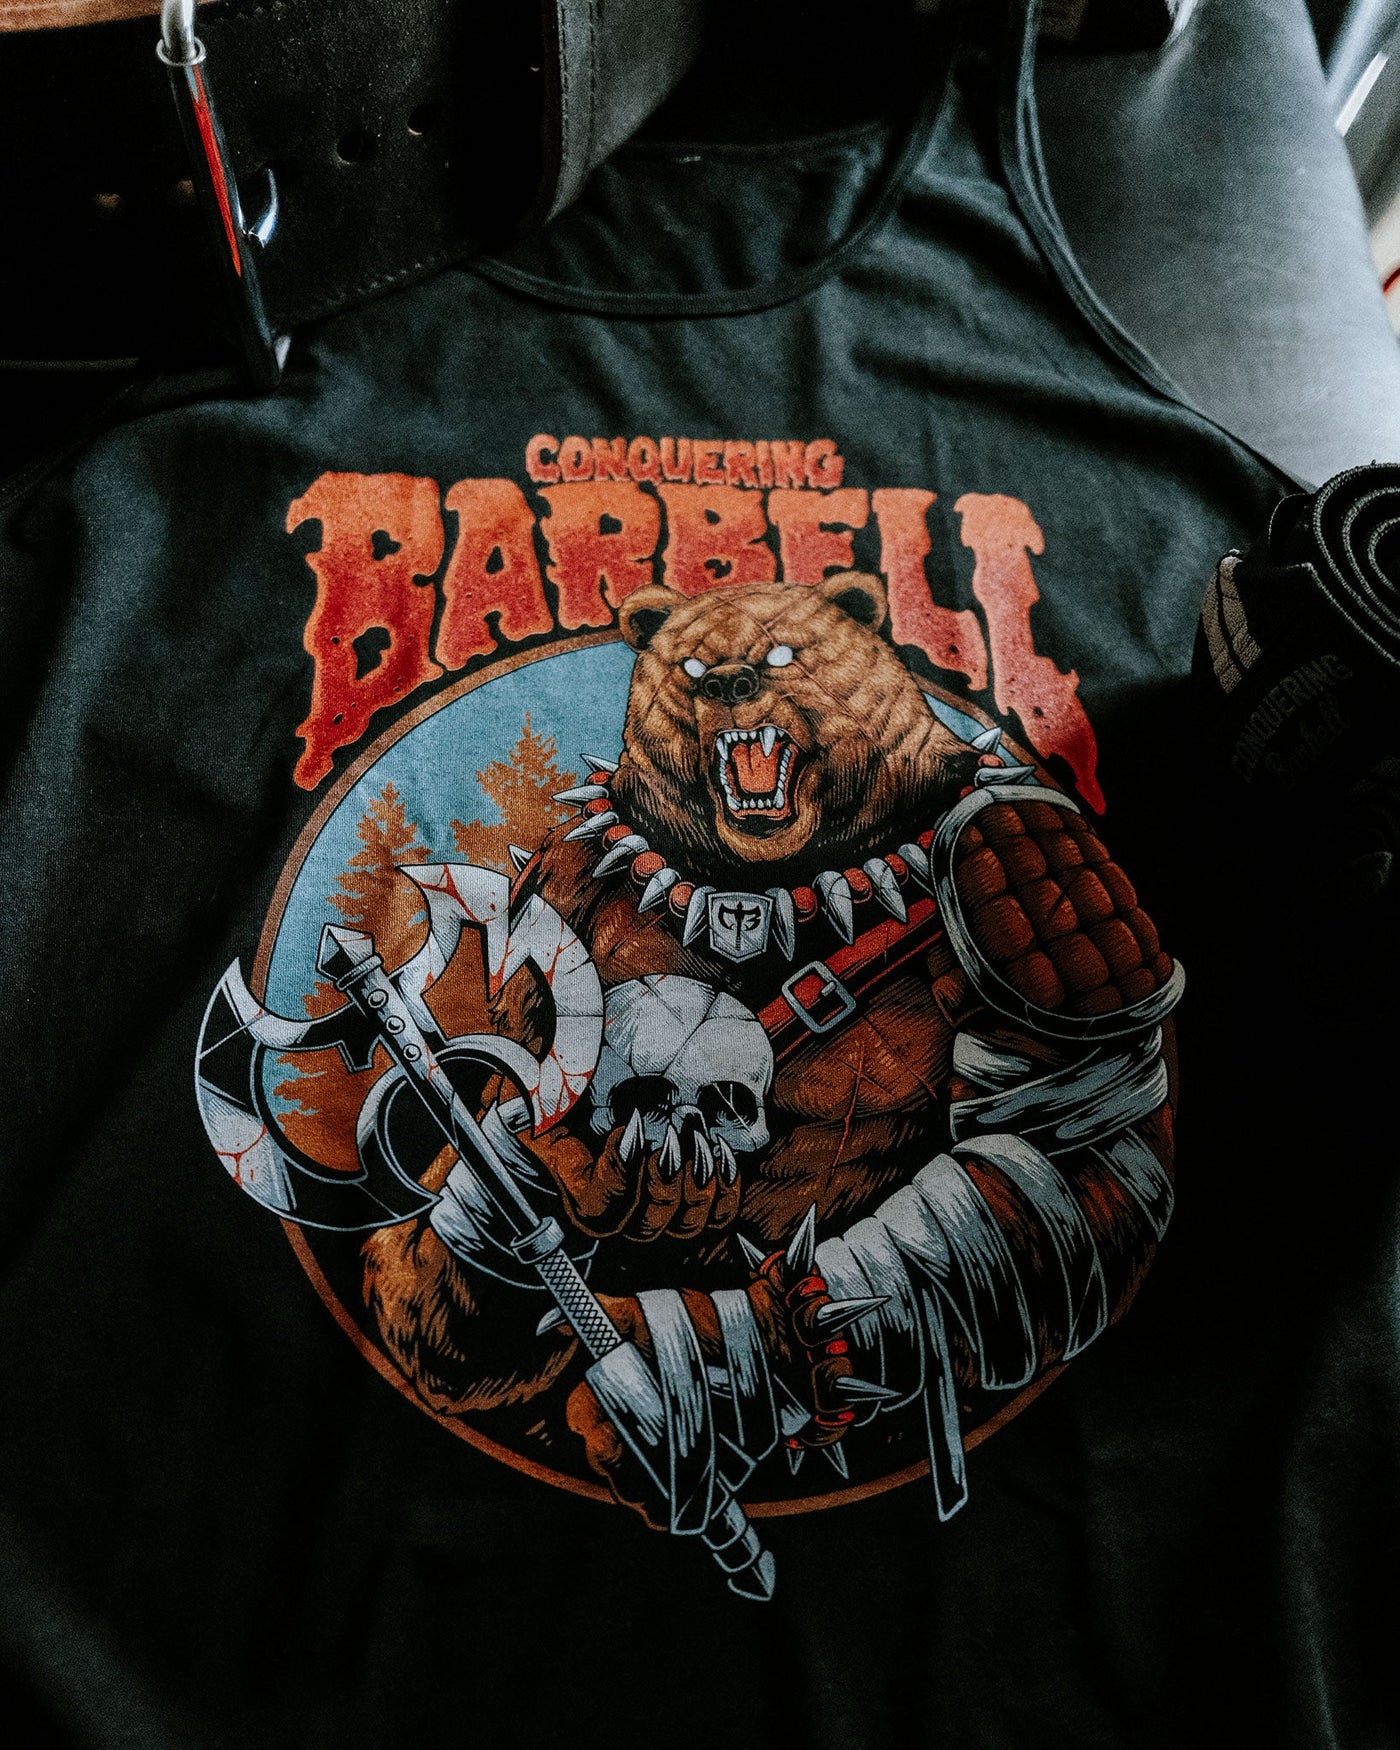 The Warrior Bear - Black tank top - Conquering Barbell